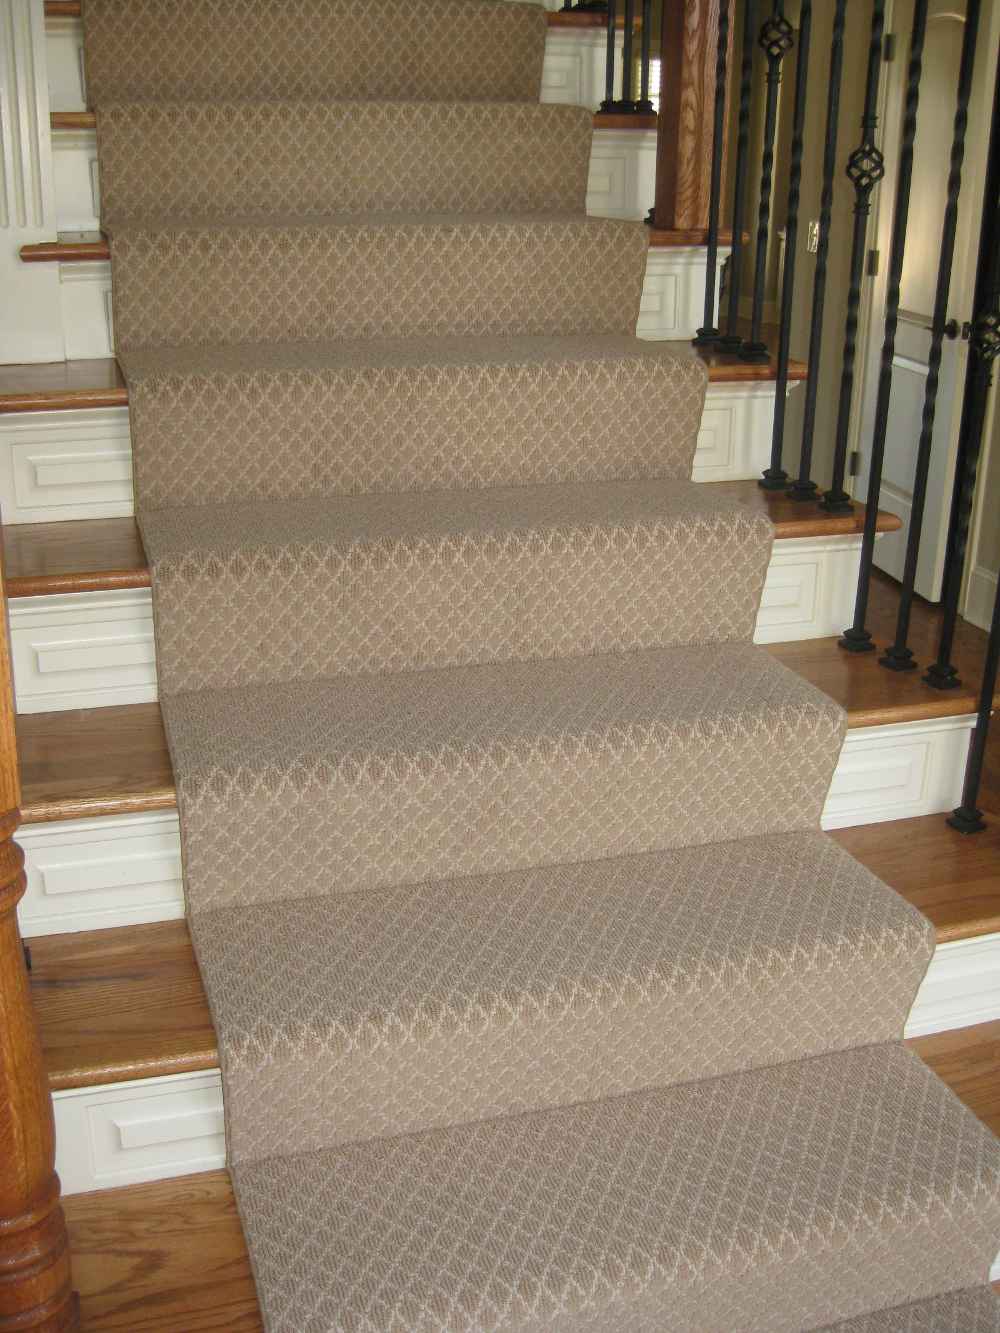 1000x1333px 7 Best Carpet Runners For Stairs Picture in Others